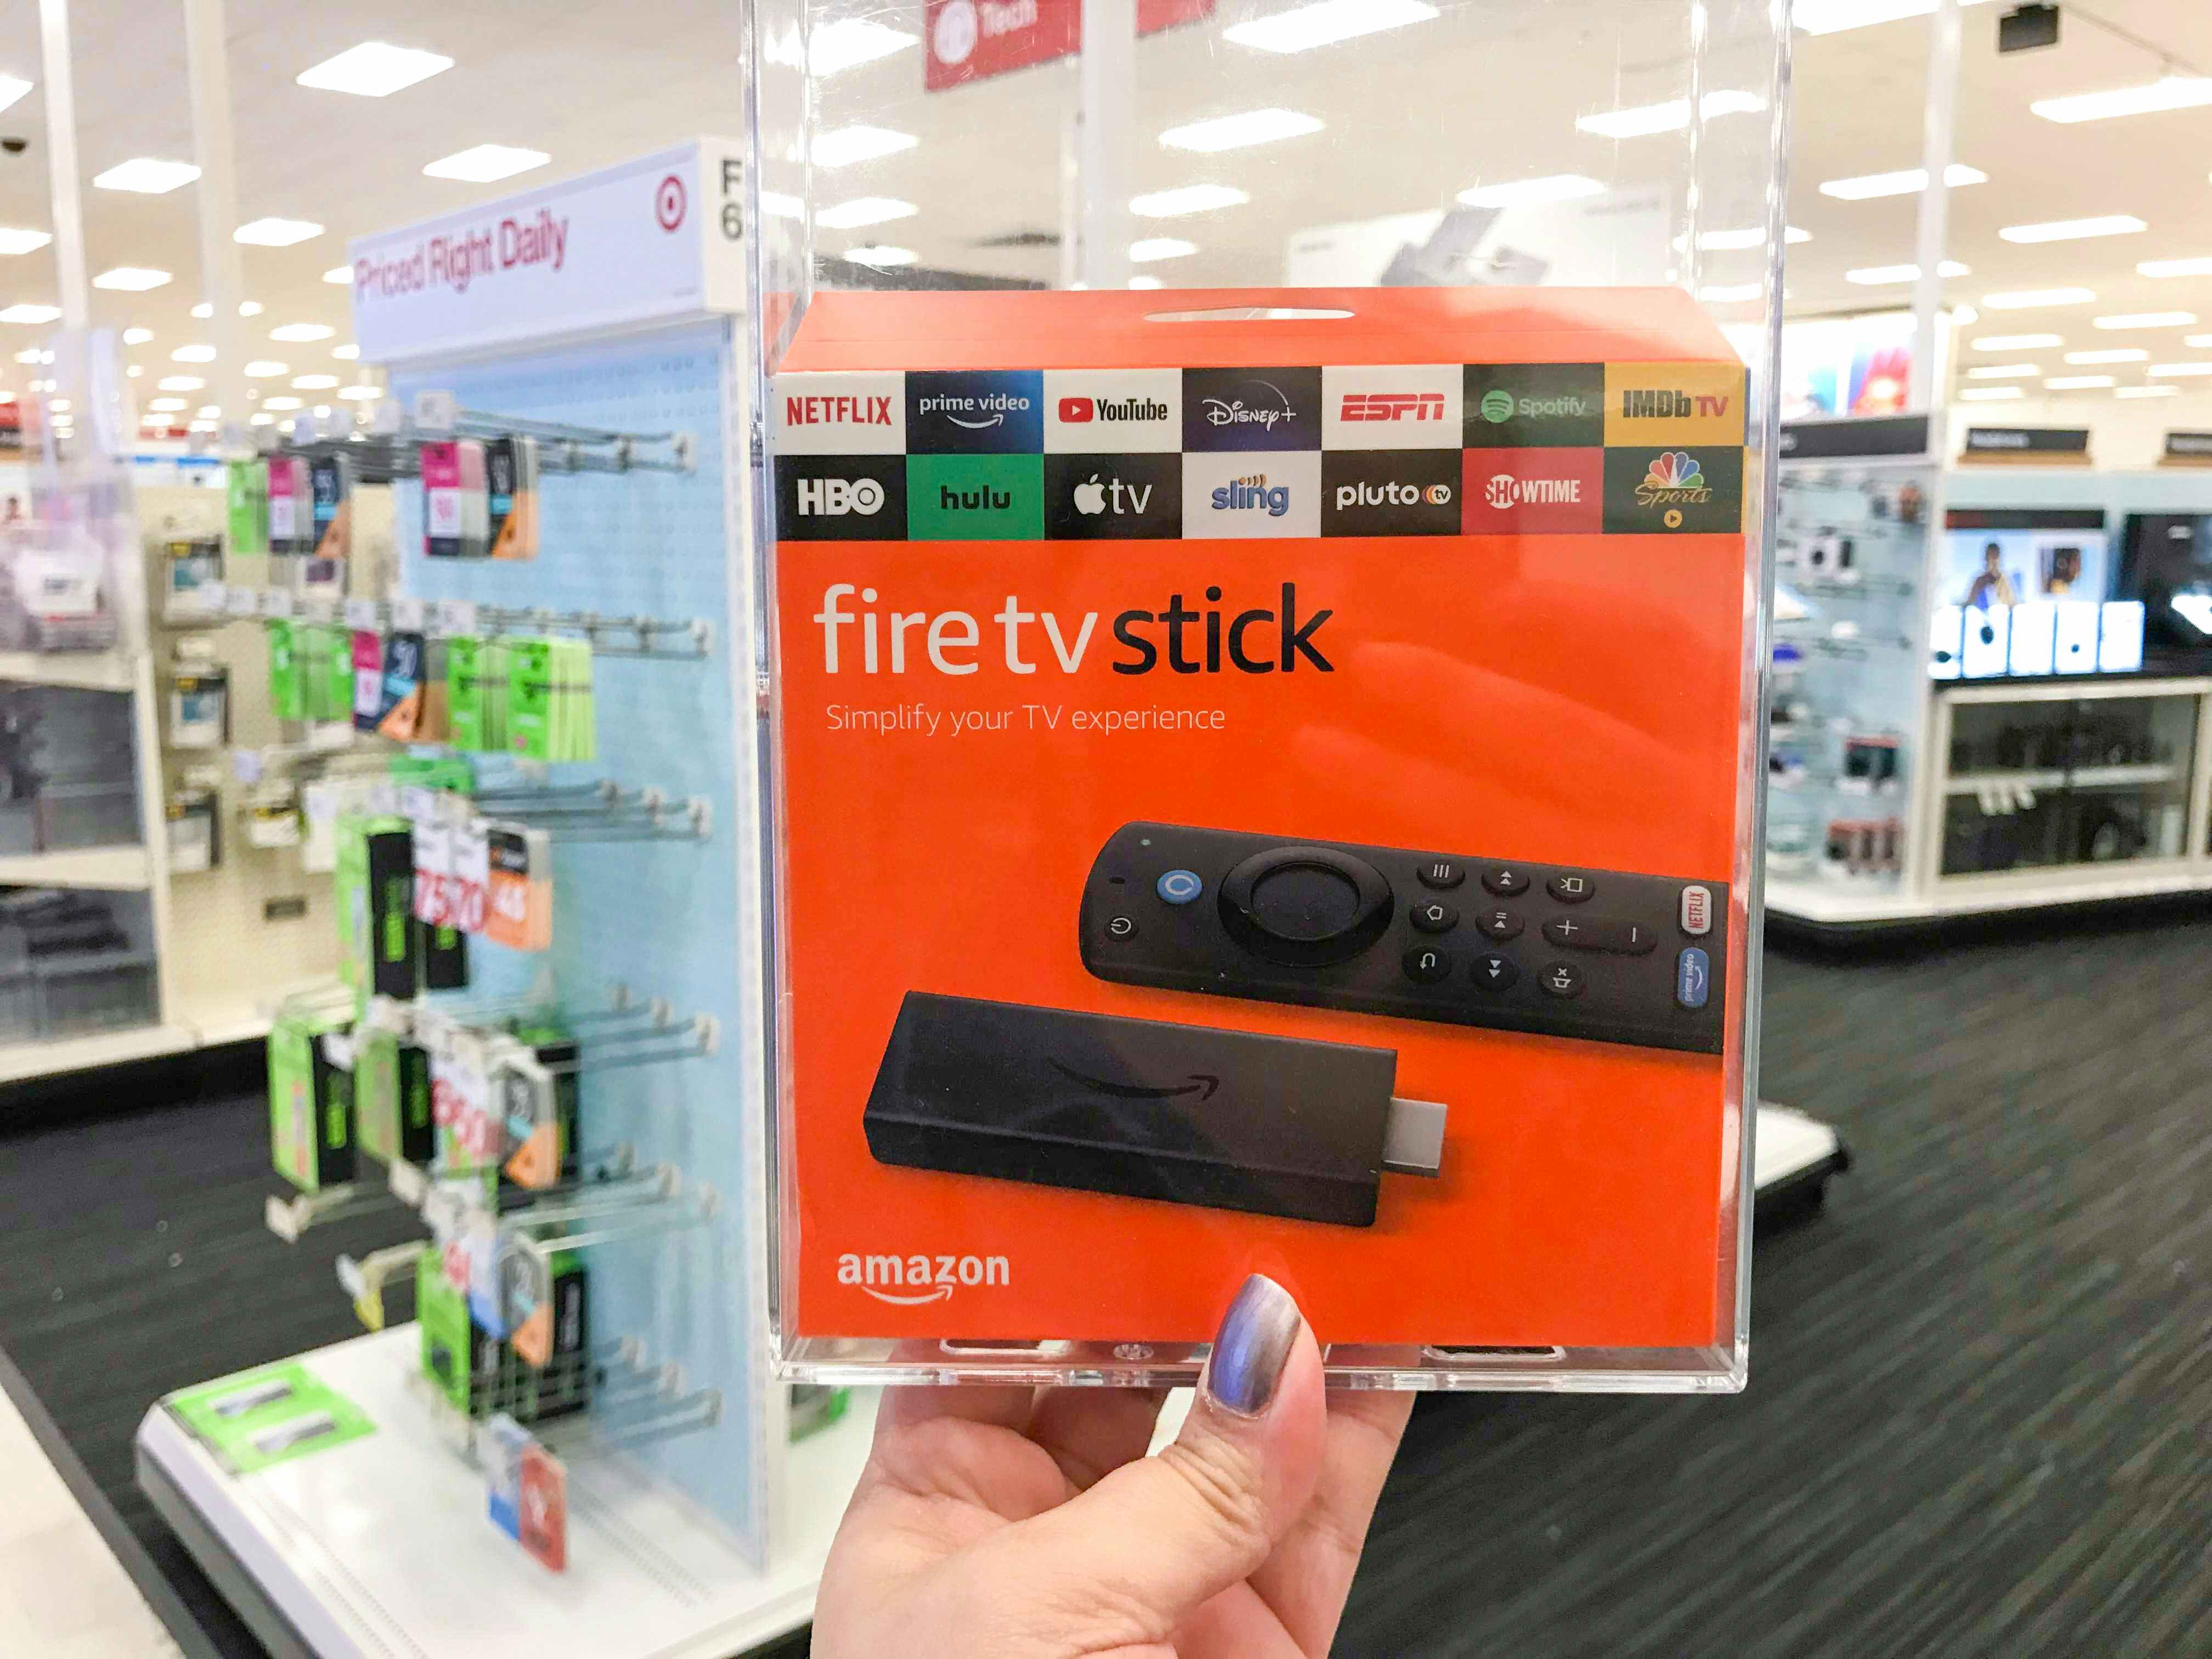 hand holding up the Amazon Fire Stick TV box in Target electronics section